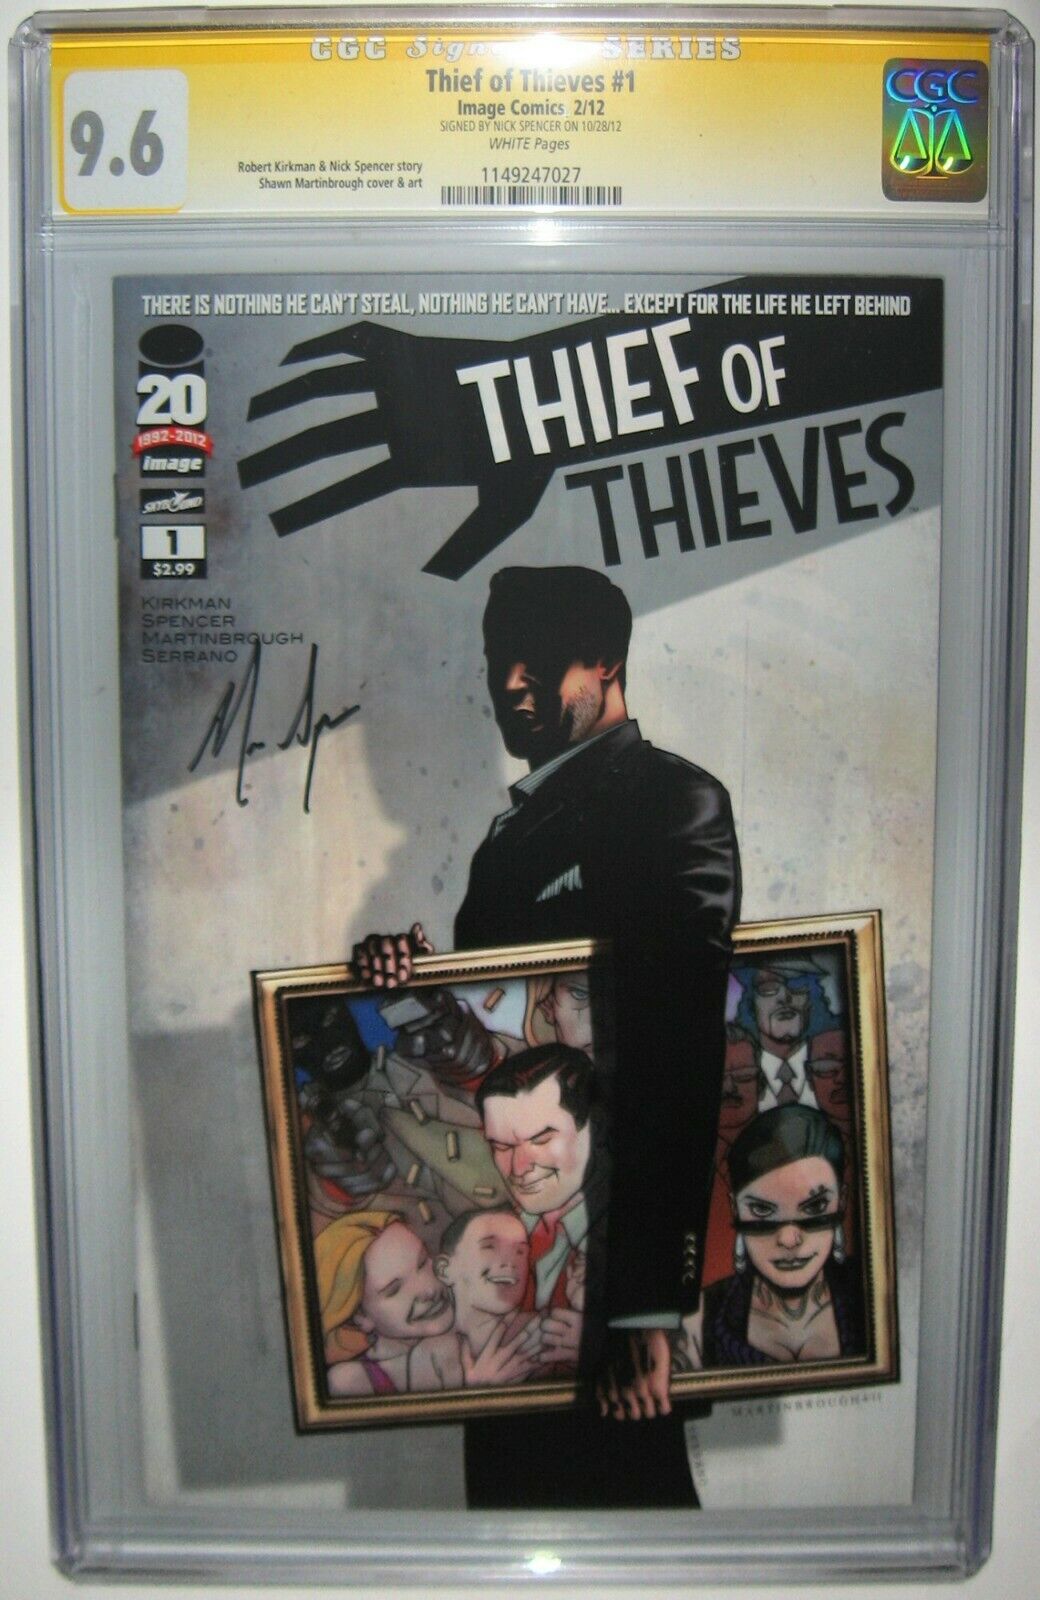 THIEF OF THIEVES #1 Nick Spencer SIGNED Autographed SS CGC 9.6 Image Comics 2012